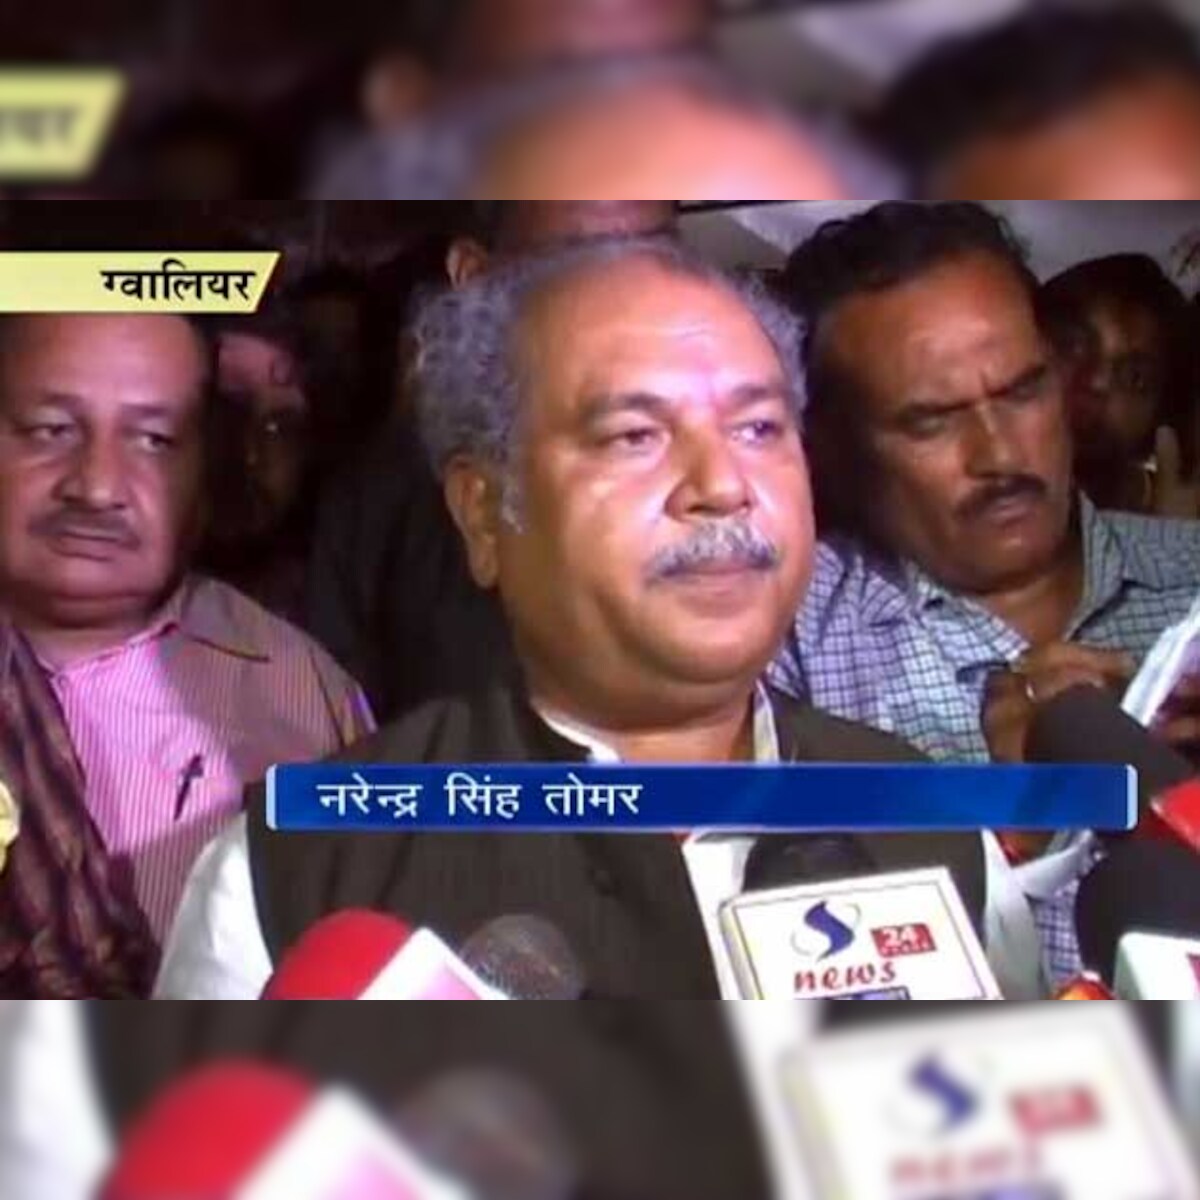 Narendra Singh Tomar: From a municipal councillor to a cabinet minister